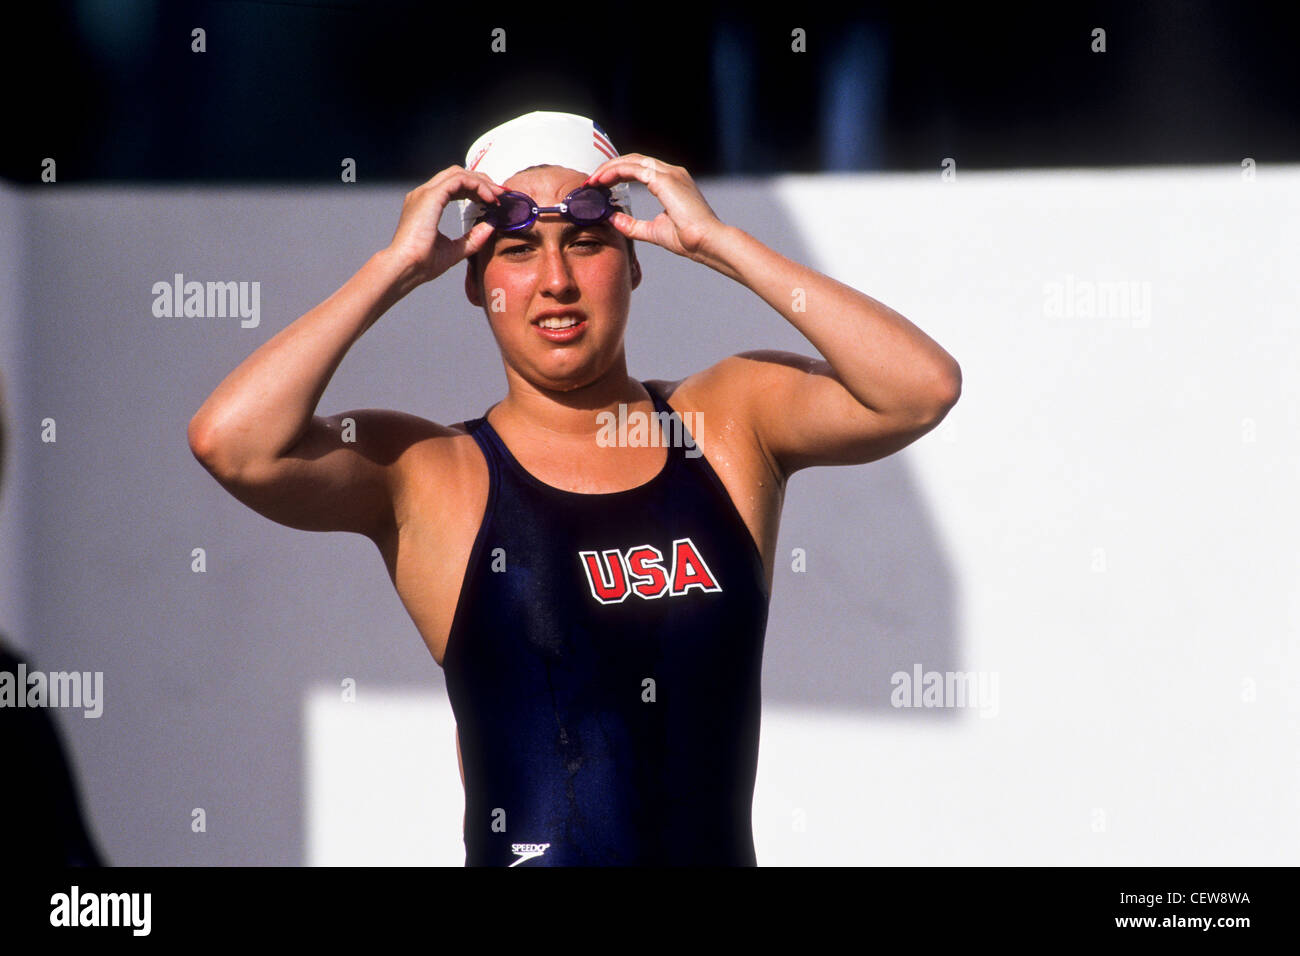 Janet Evans (USA) competing at the 1992 Alamo. Stock Photo